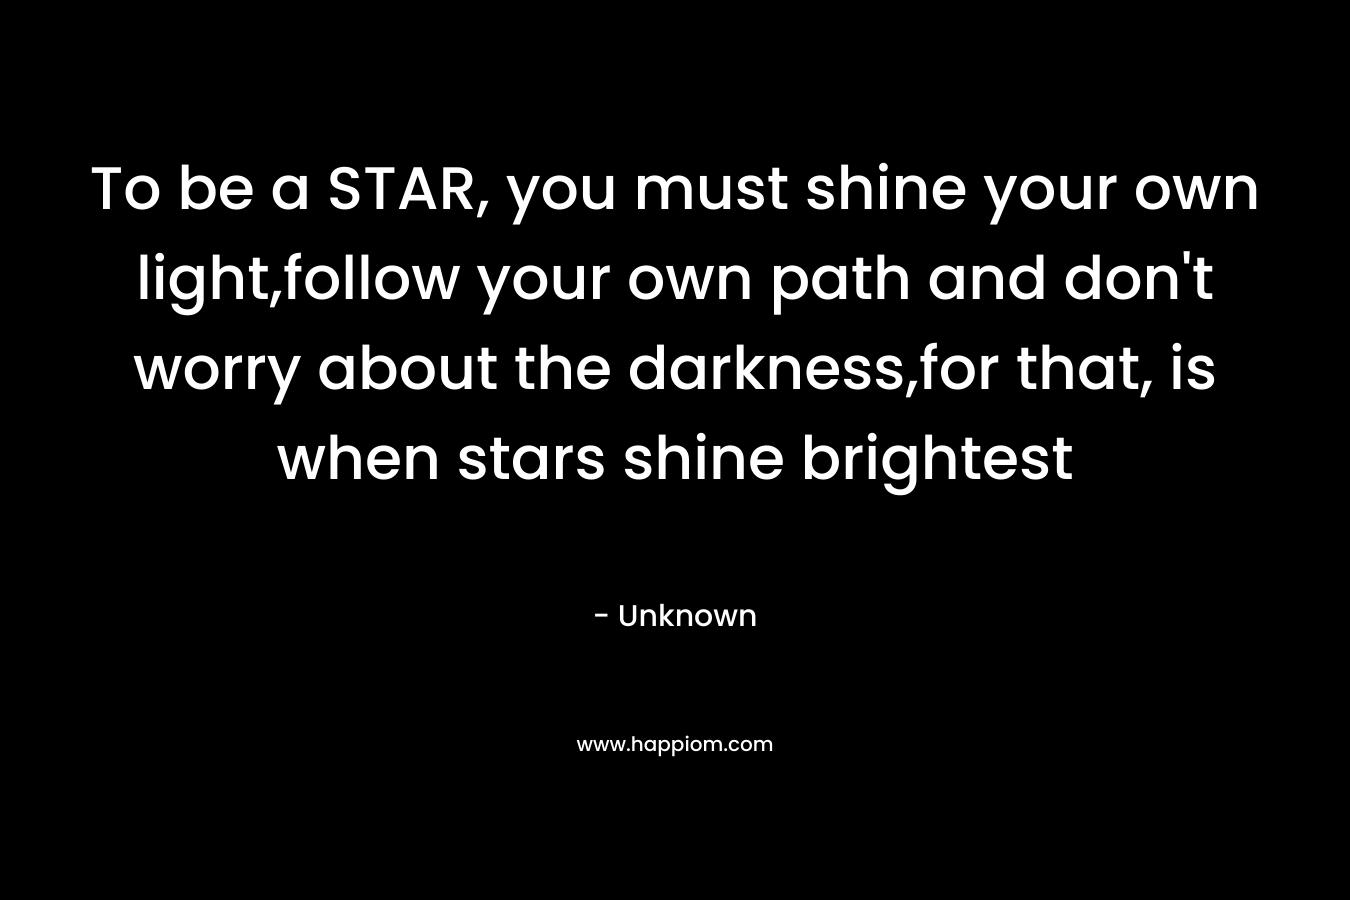 To be a STAR, you must shine your own light,follow your own path and don't worry about the darkness,for that, is when stars shine brightest